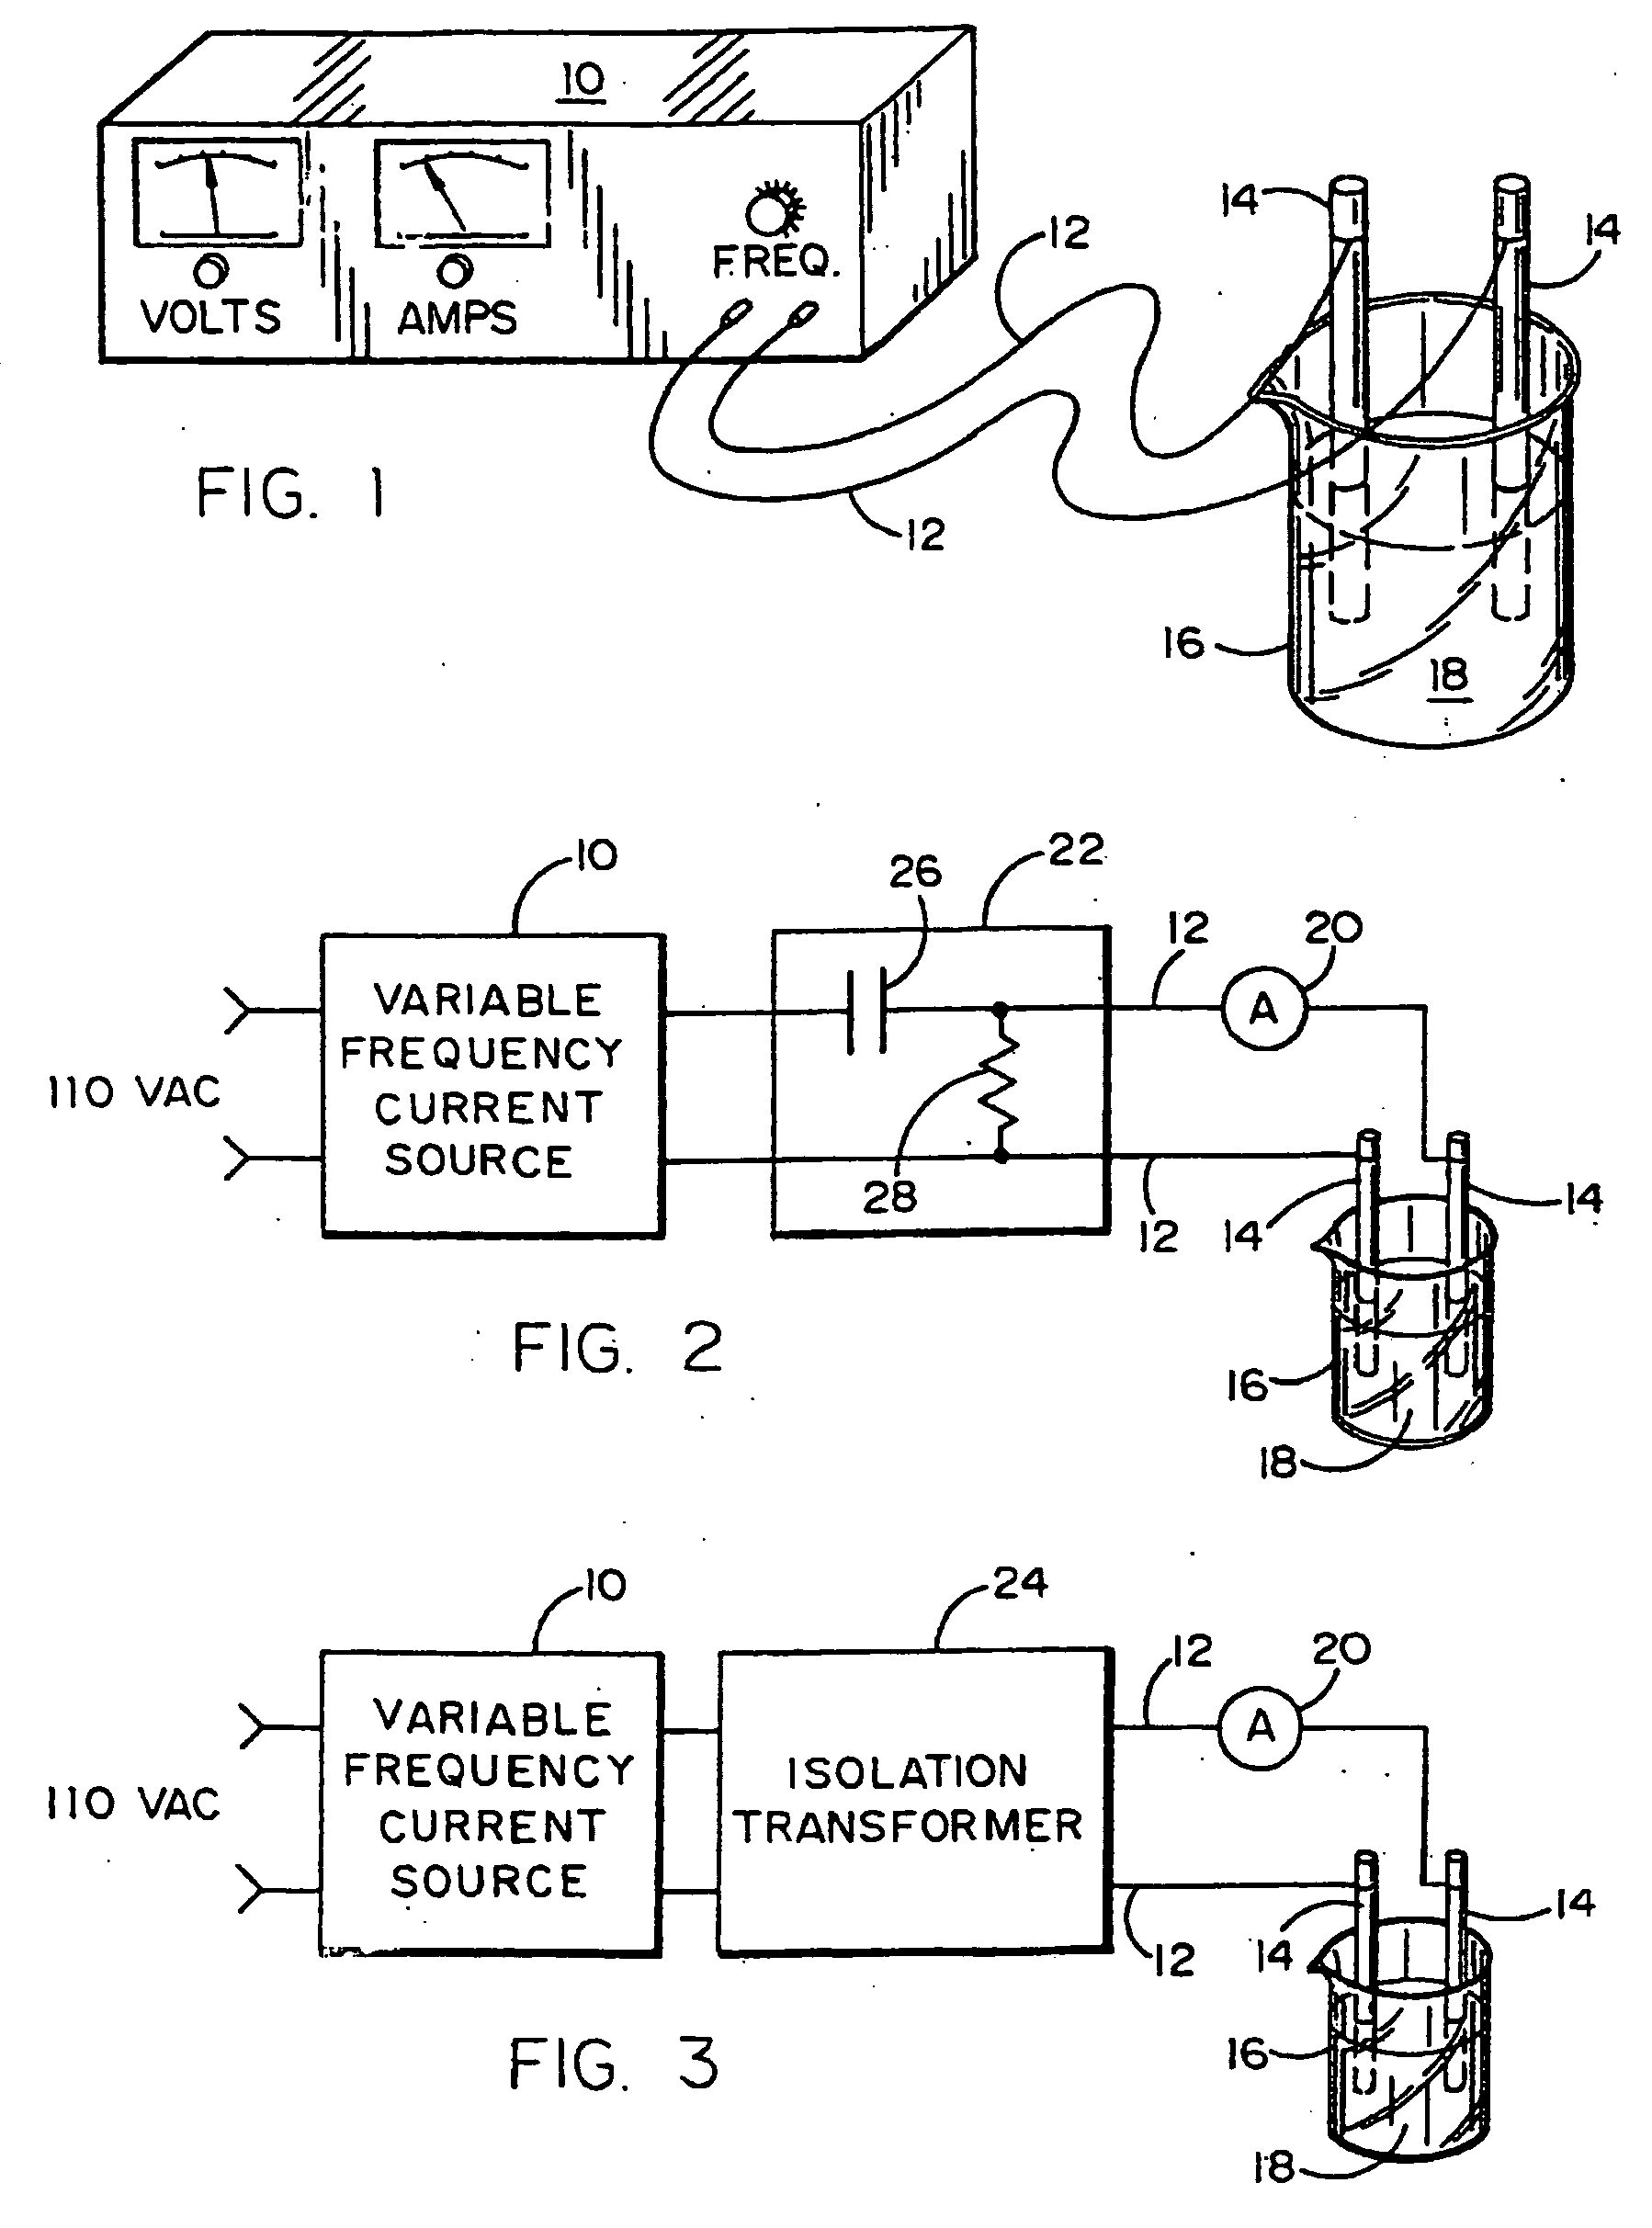 Method of providing cosmetic/medical therapy